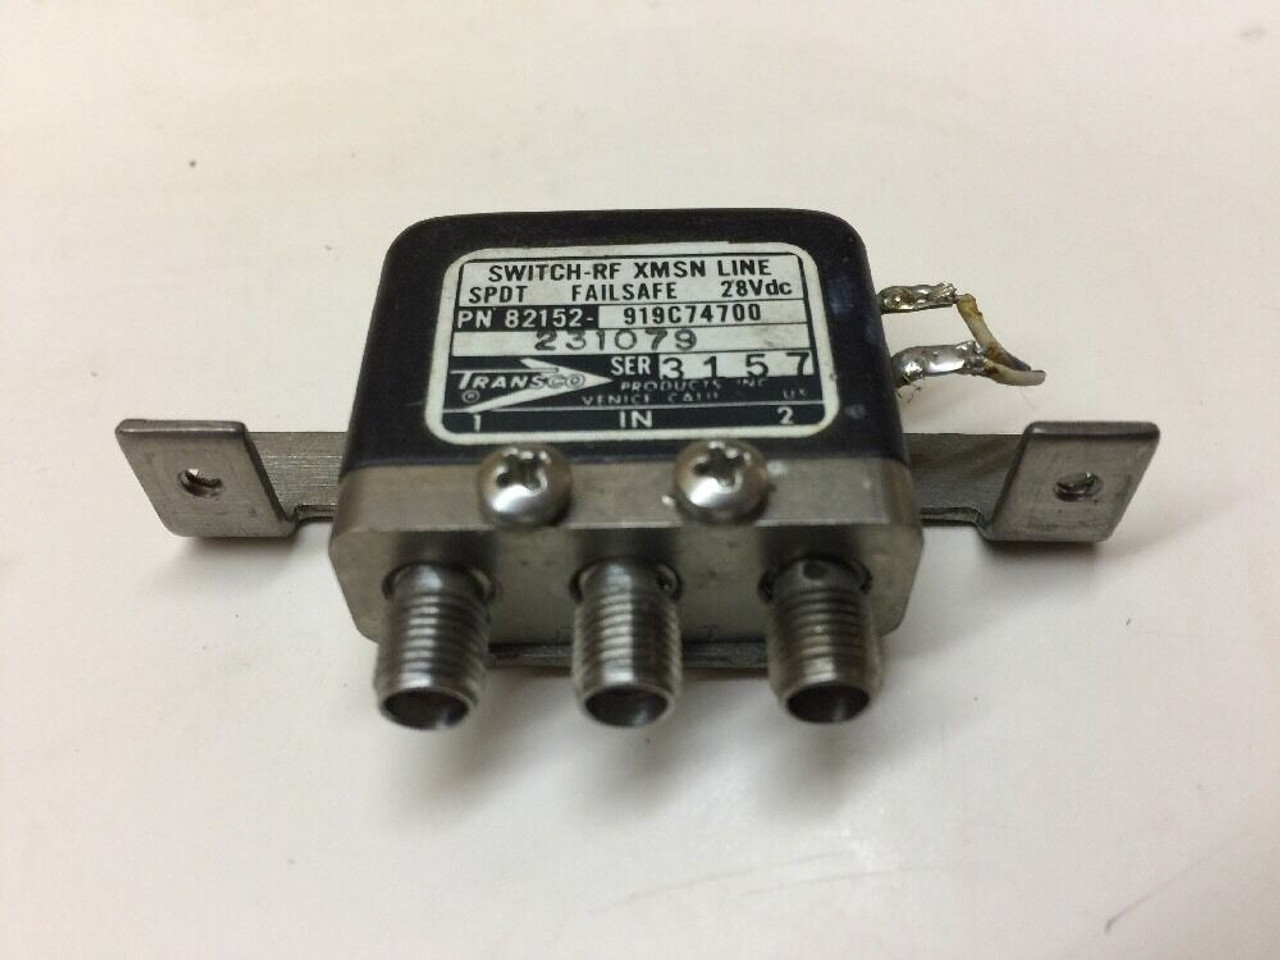 RF Coaxial Switch 231079 Transco XMSN Line SPDT Failsafe